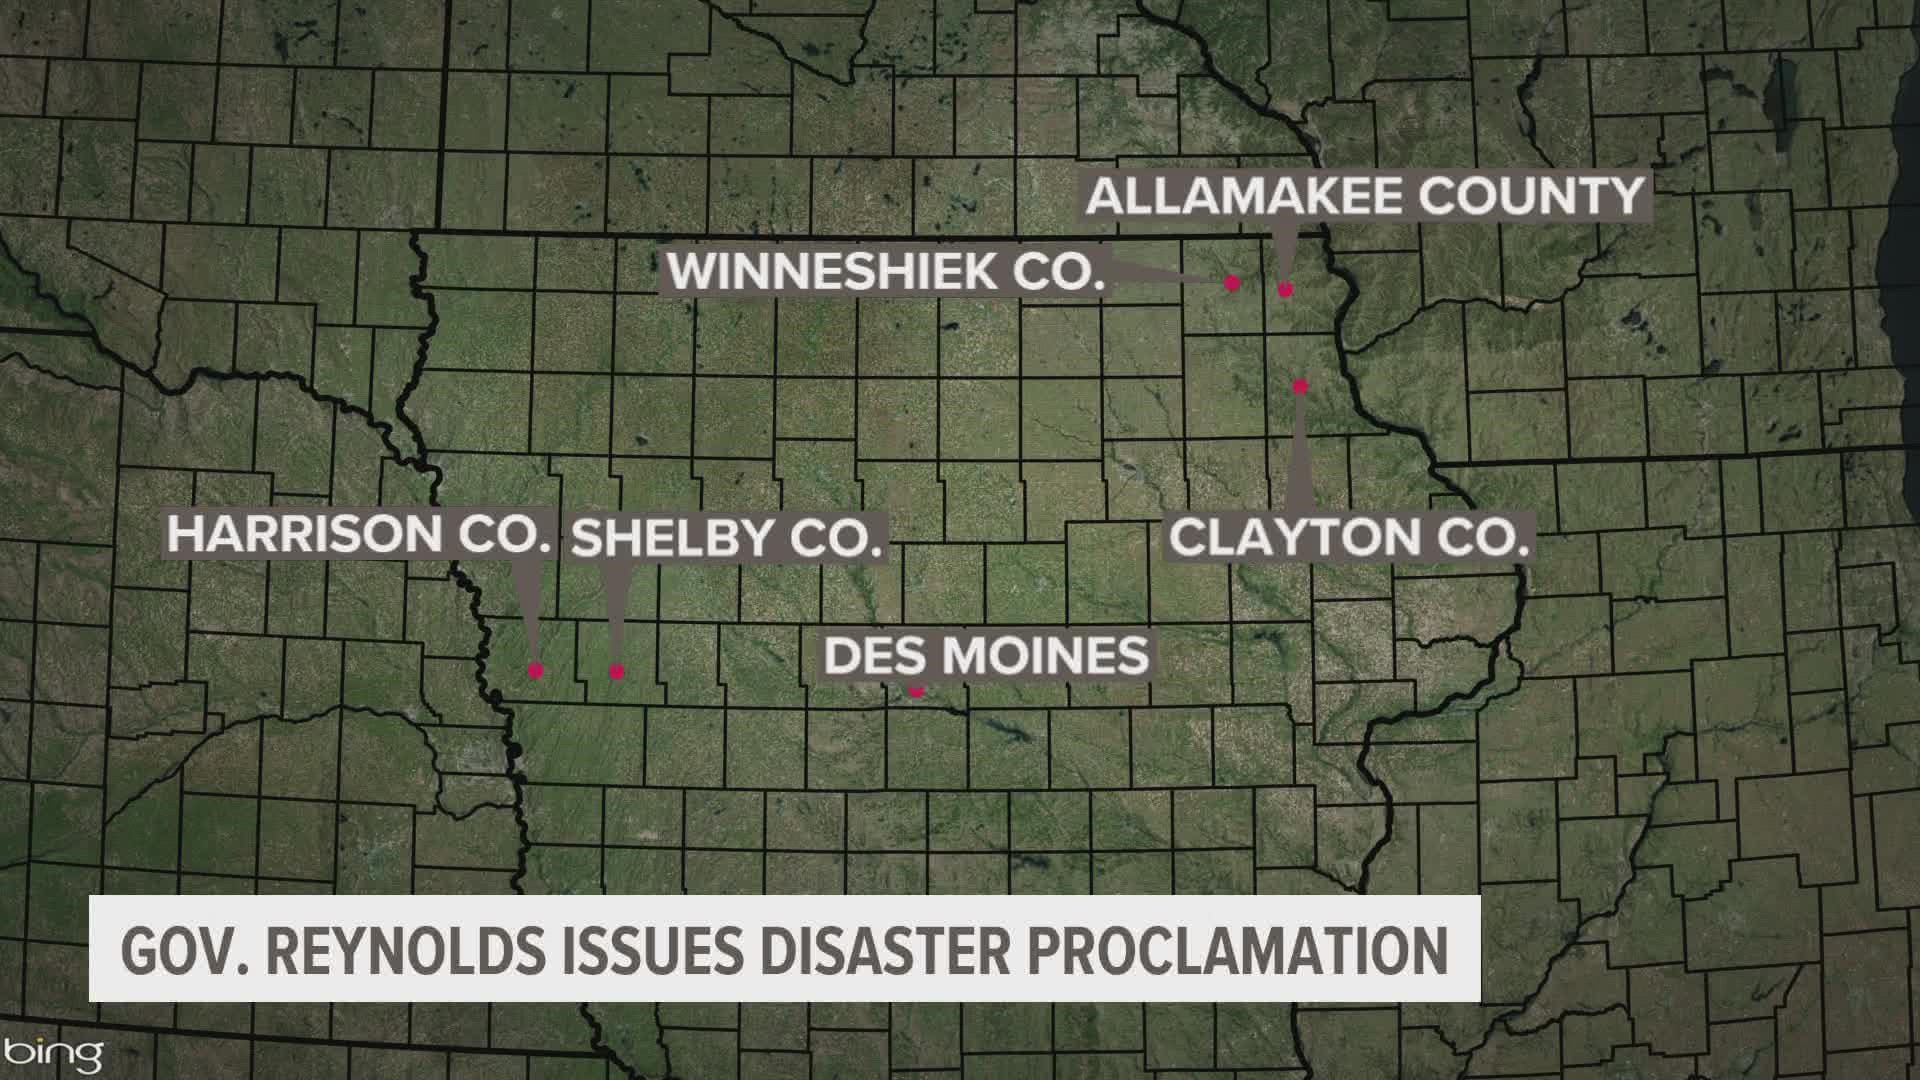 Assistance programs have been activated for qualifying residents in Allamakee, Clayton, Harrison, Shelby and Winneshiek County after recent severe weather.